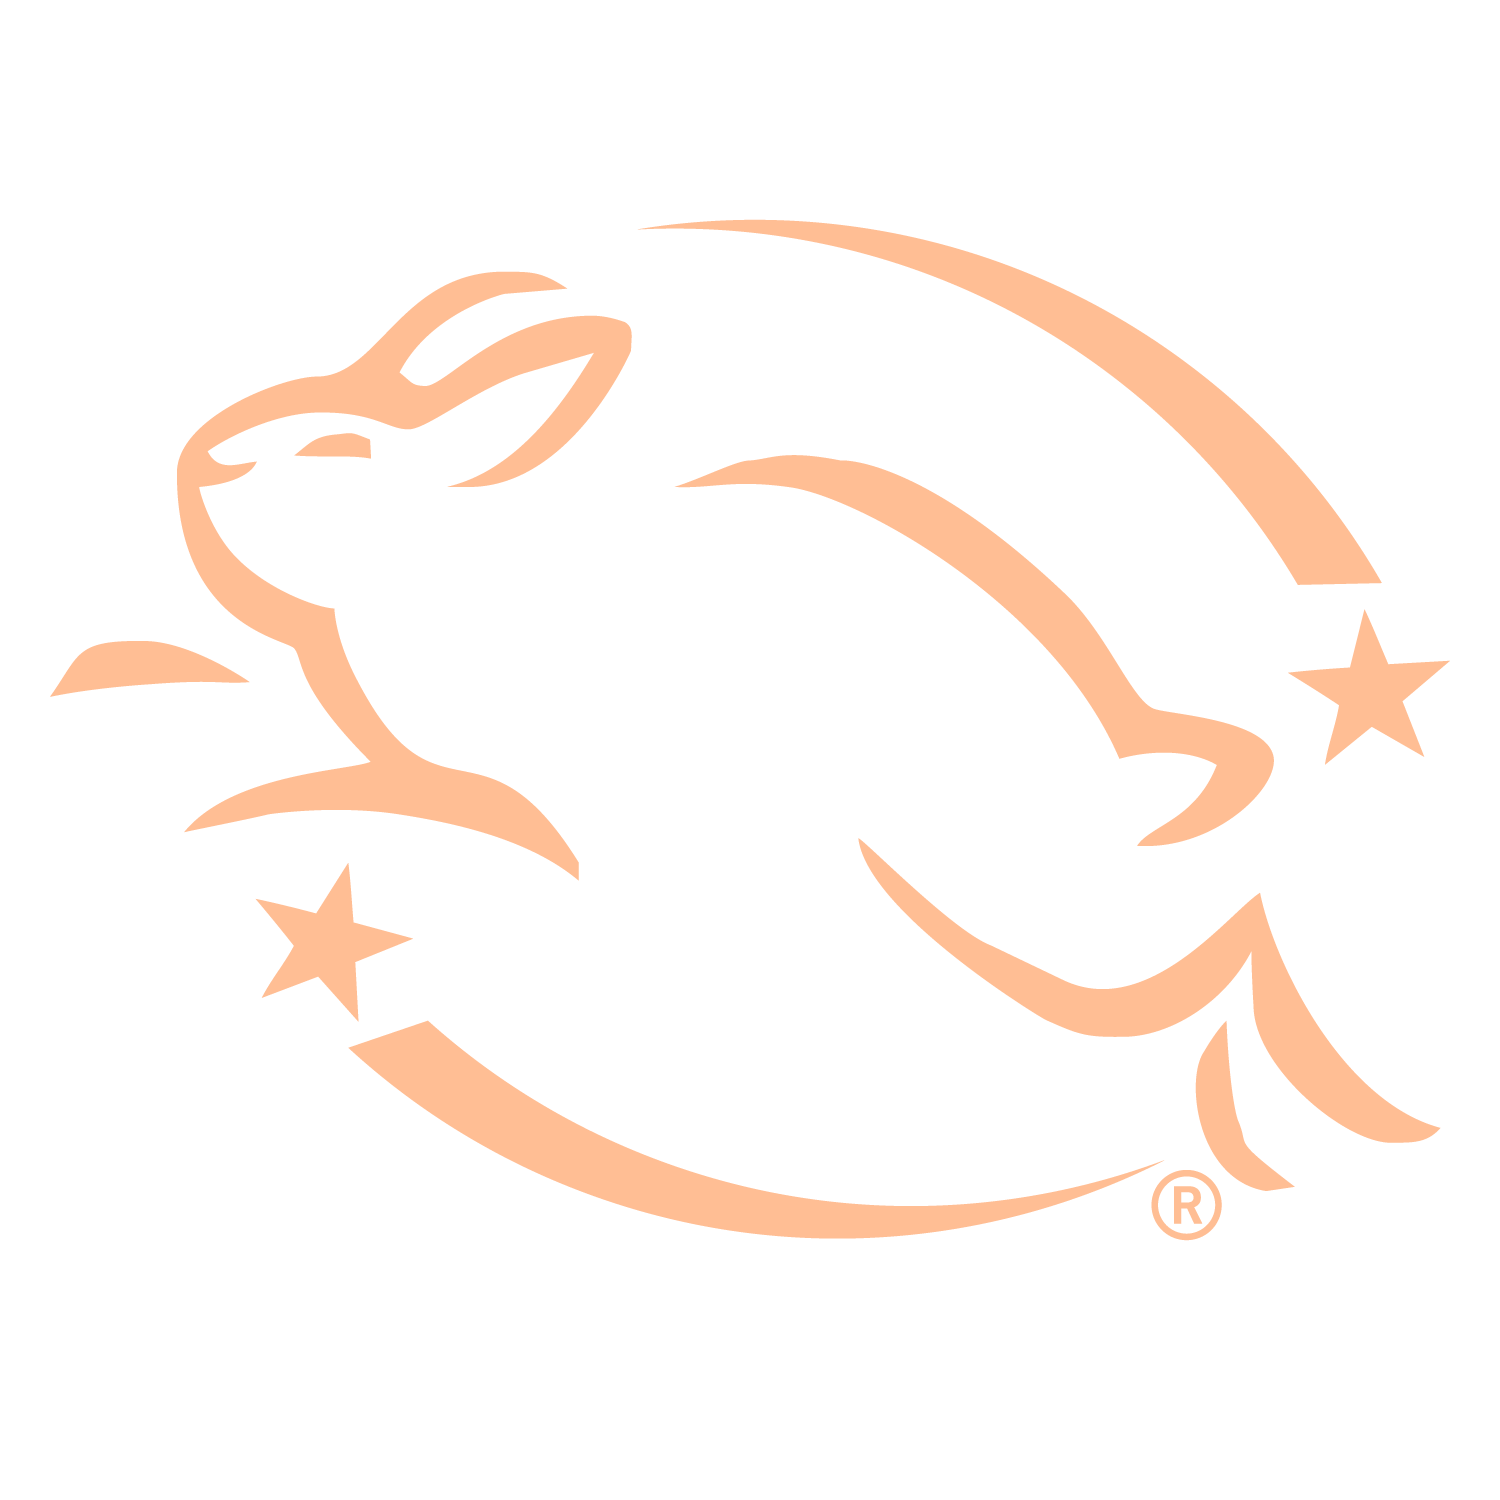 Cruelty-free & Leaping Bunny Certified
